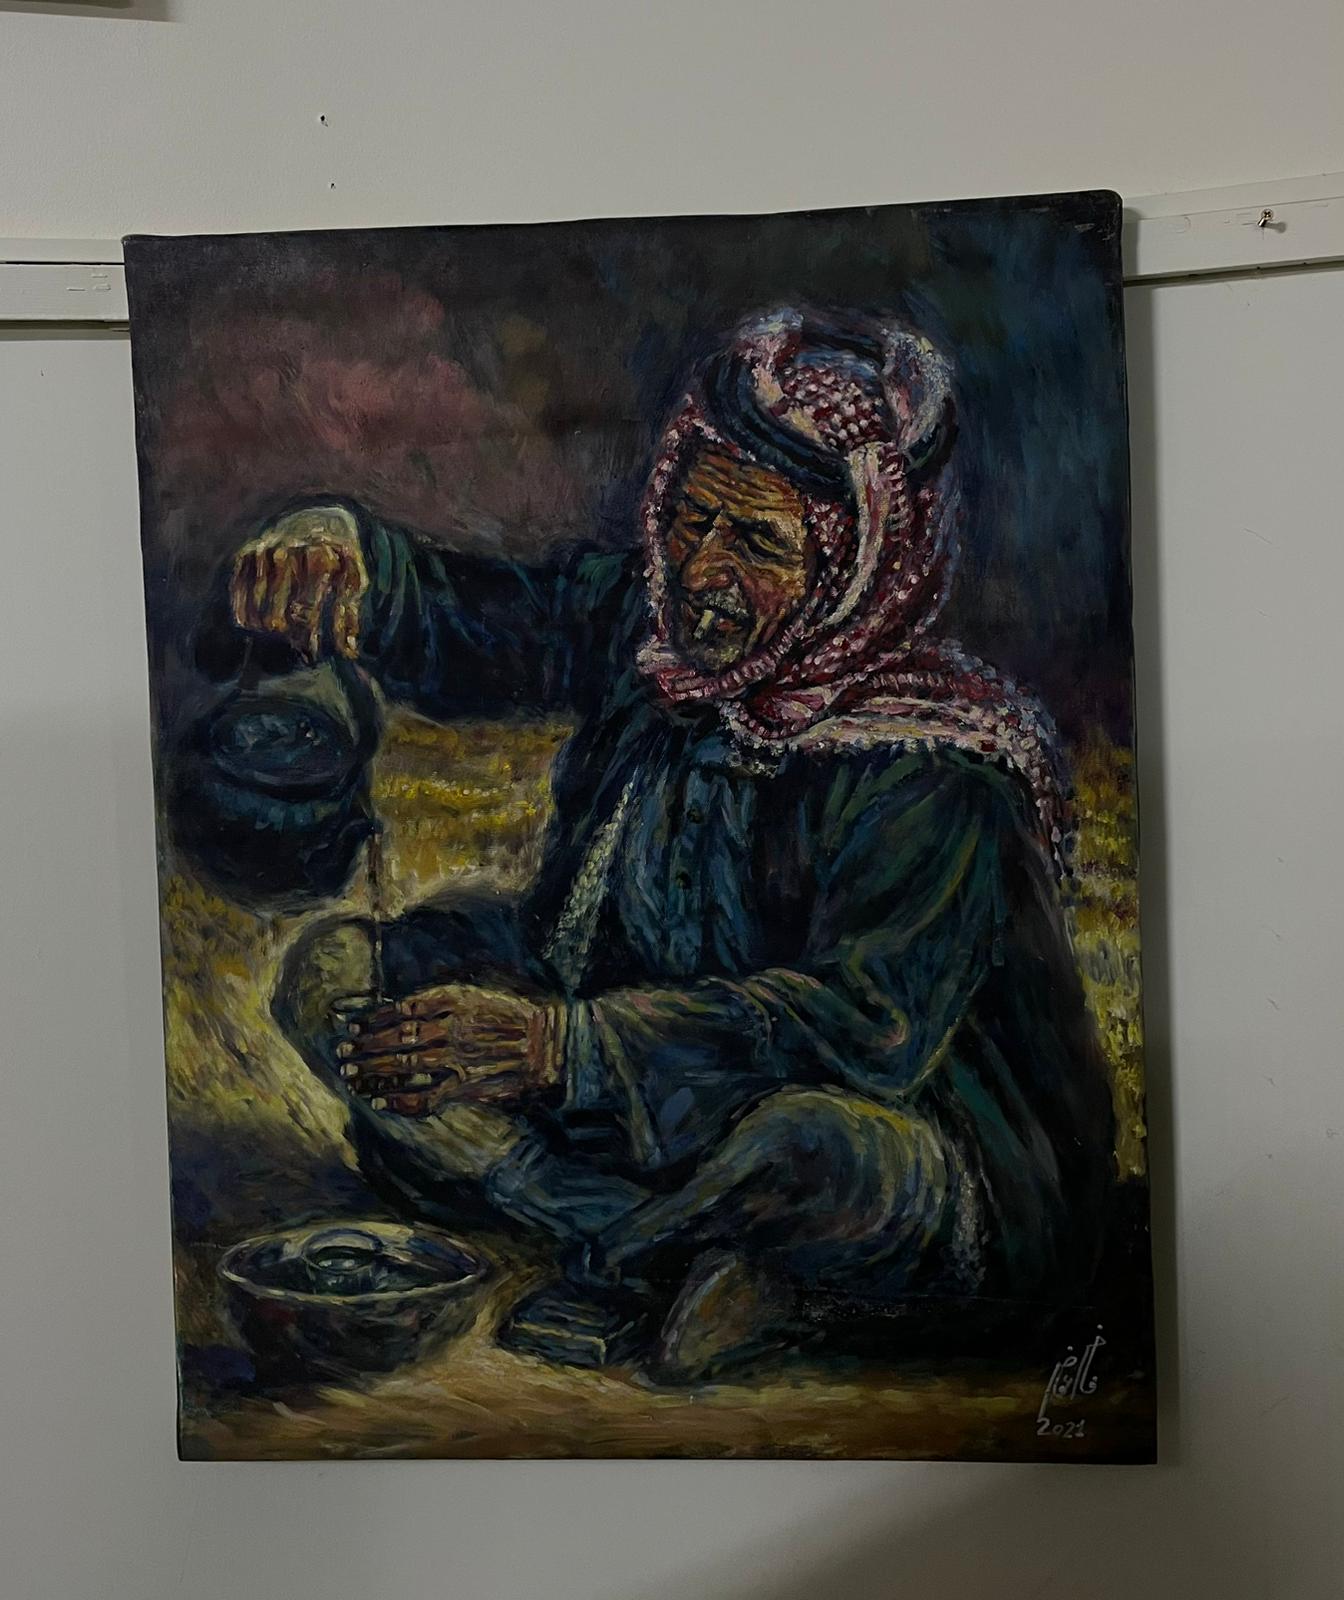 The Arab American University Participates in the Opening of an Exhibition for Artists from Gaza